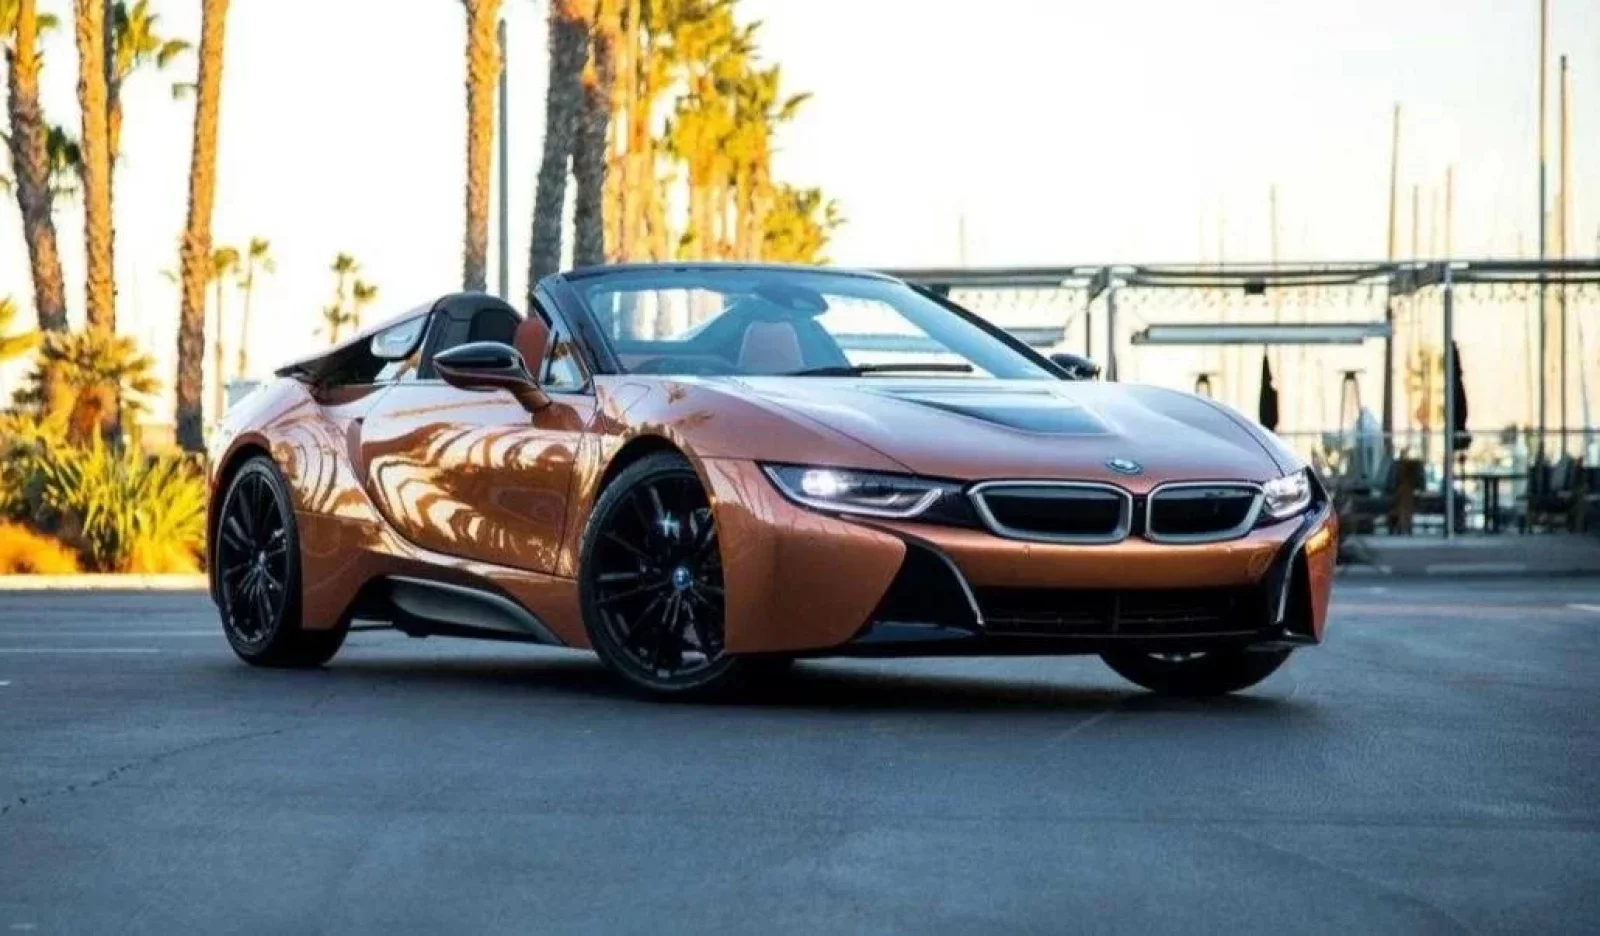 Rent BMW i8 Roadster Gold 2019 in Miami